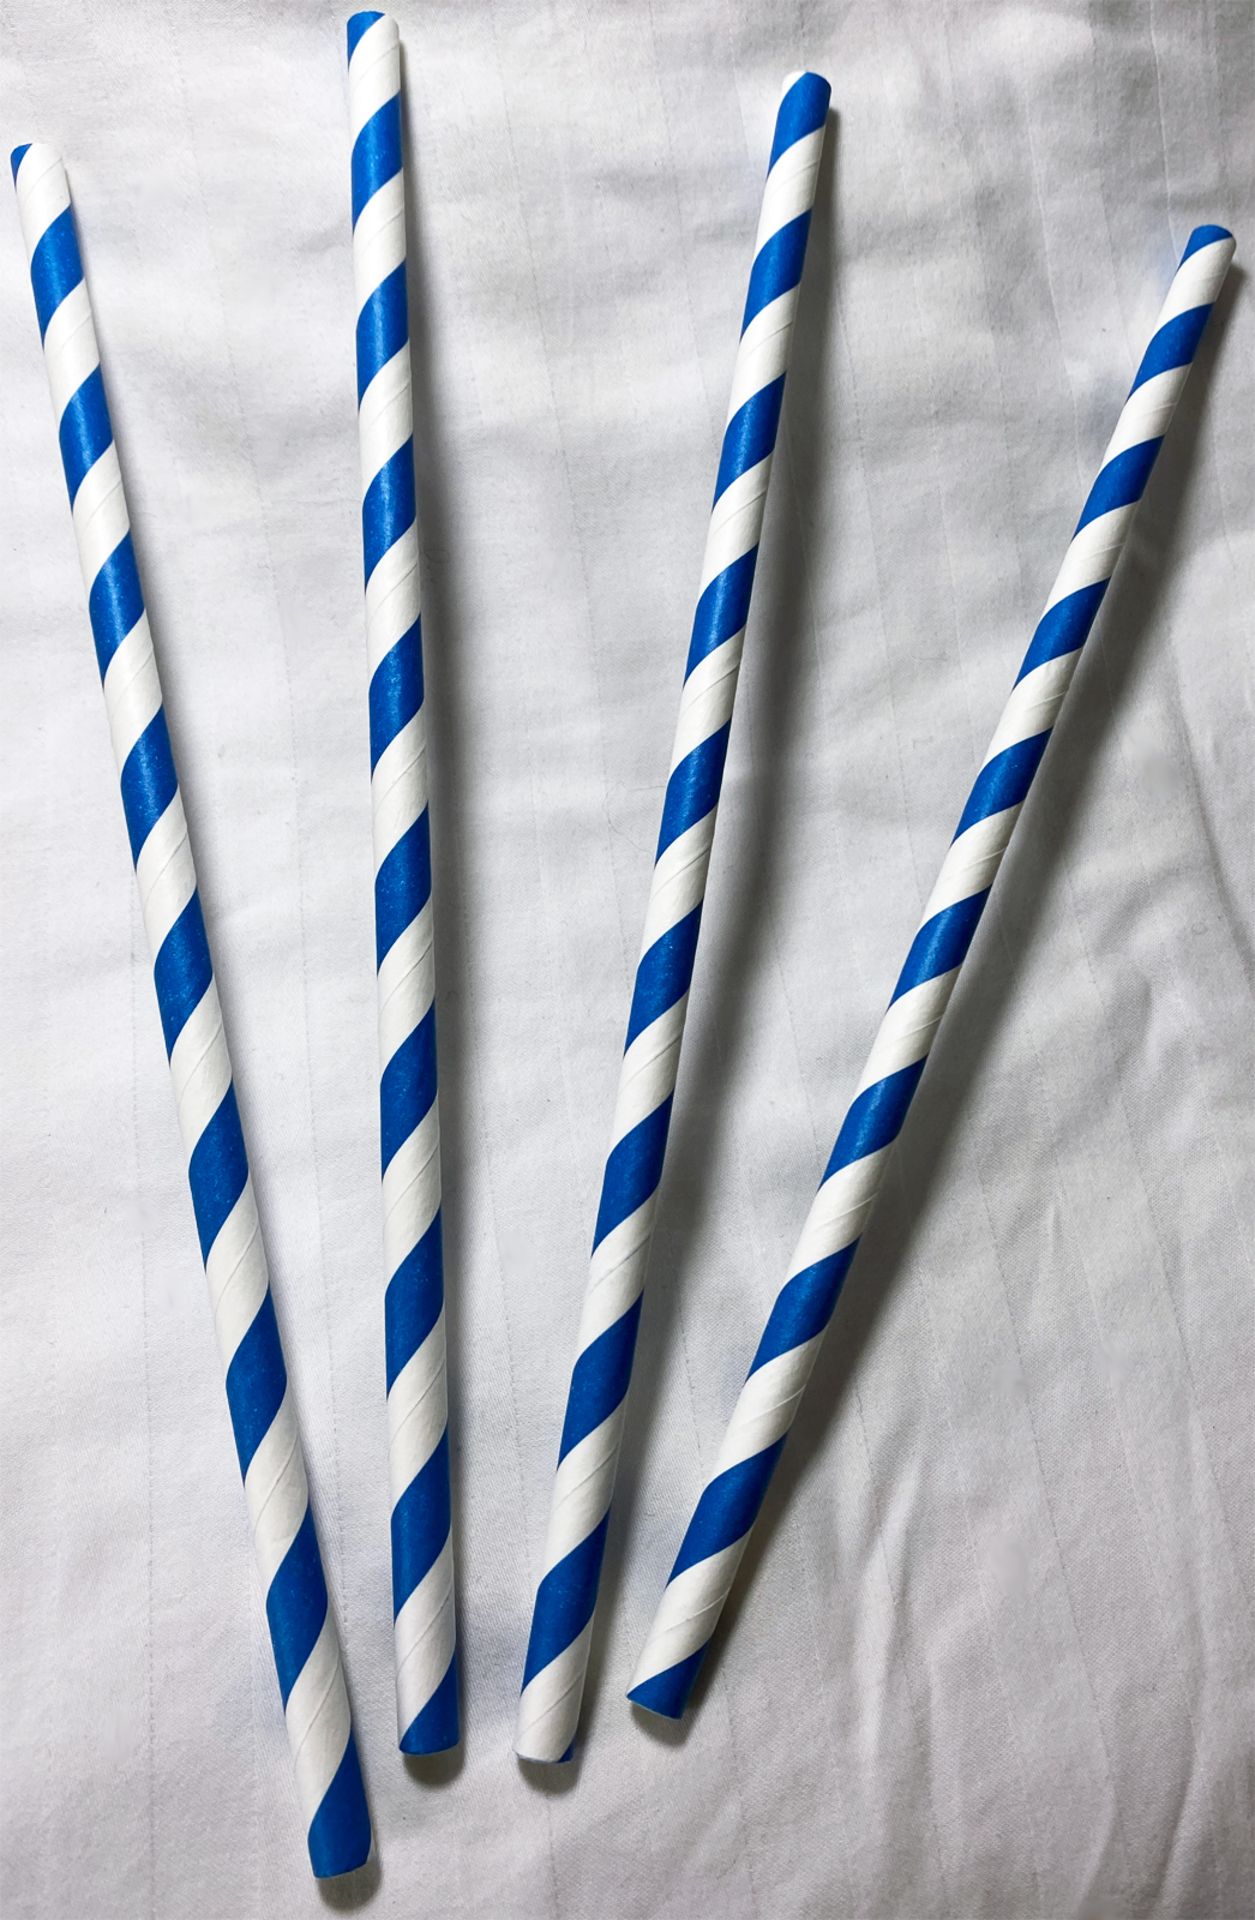 5 x Boxes of Candy Twist Paper Straws by 888 Gastro Disposables - Image 3 of 5